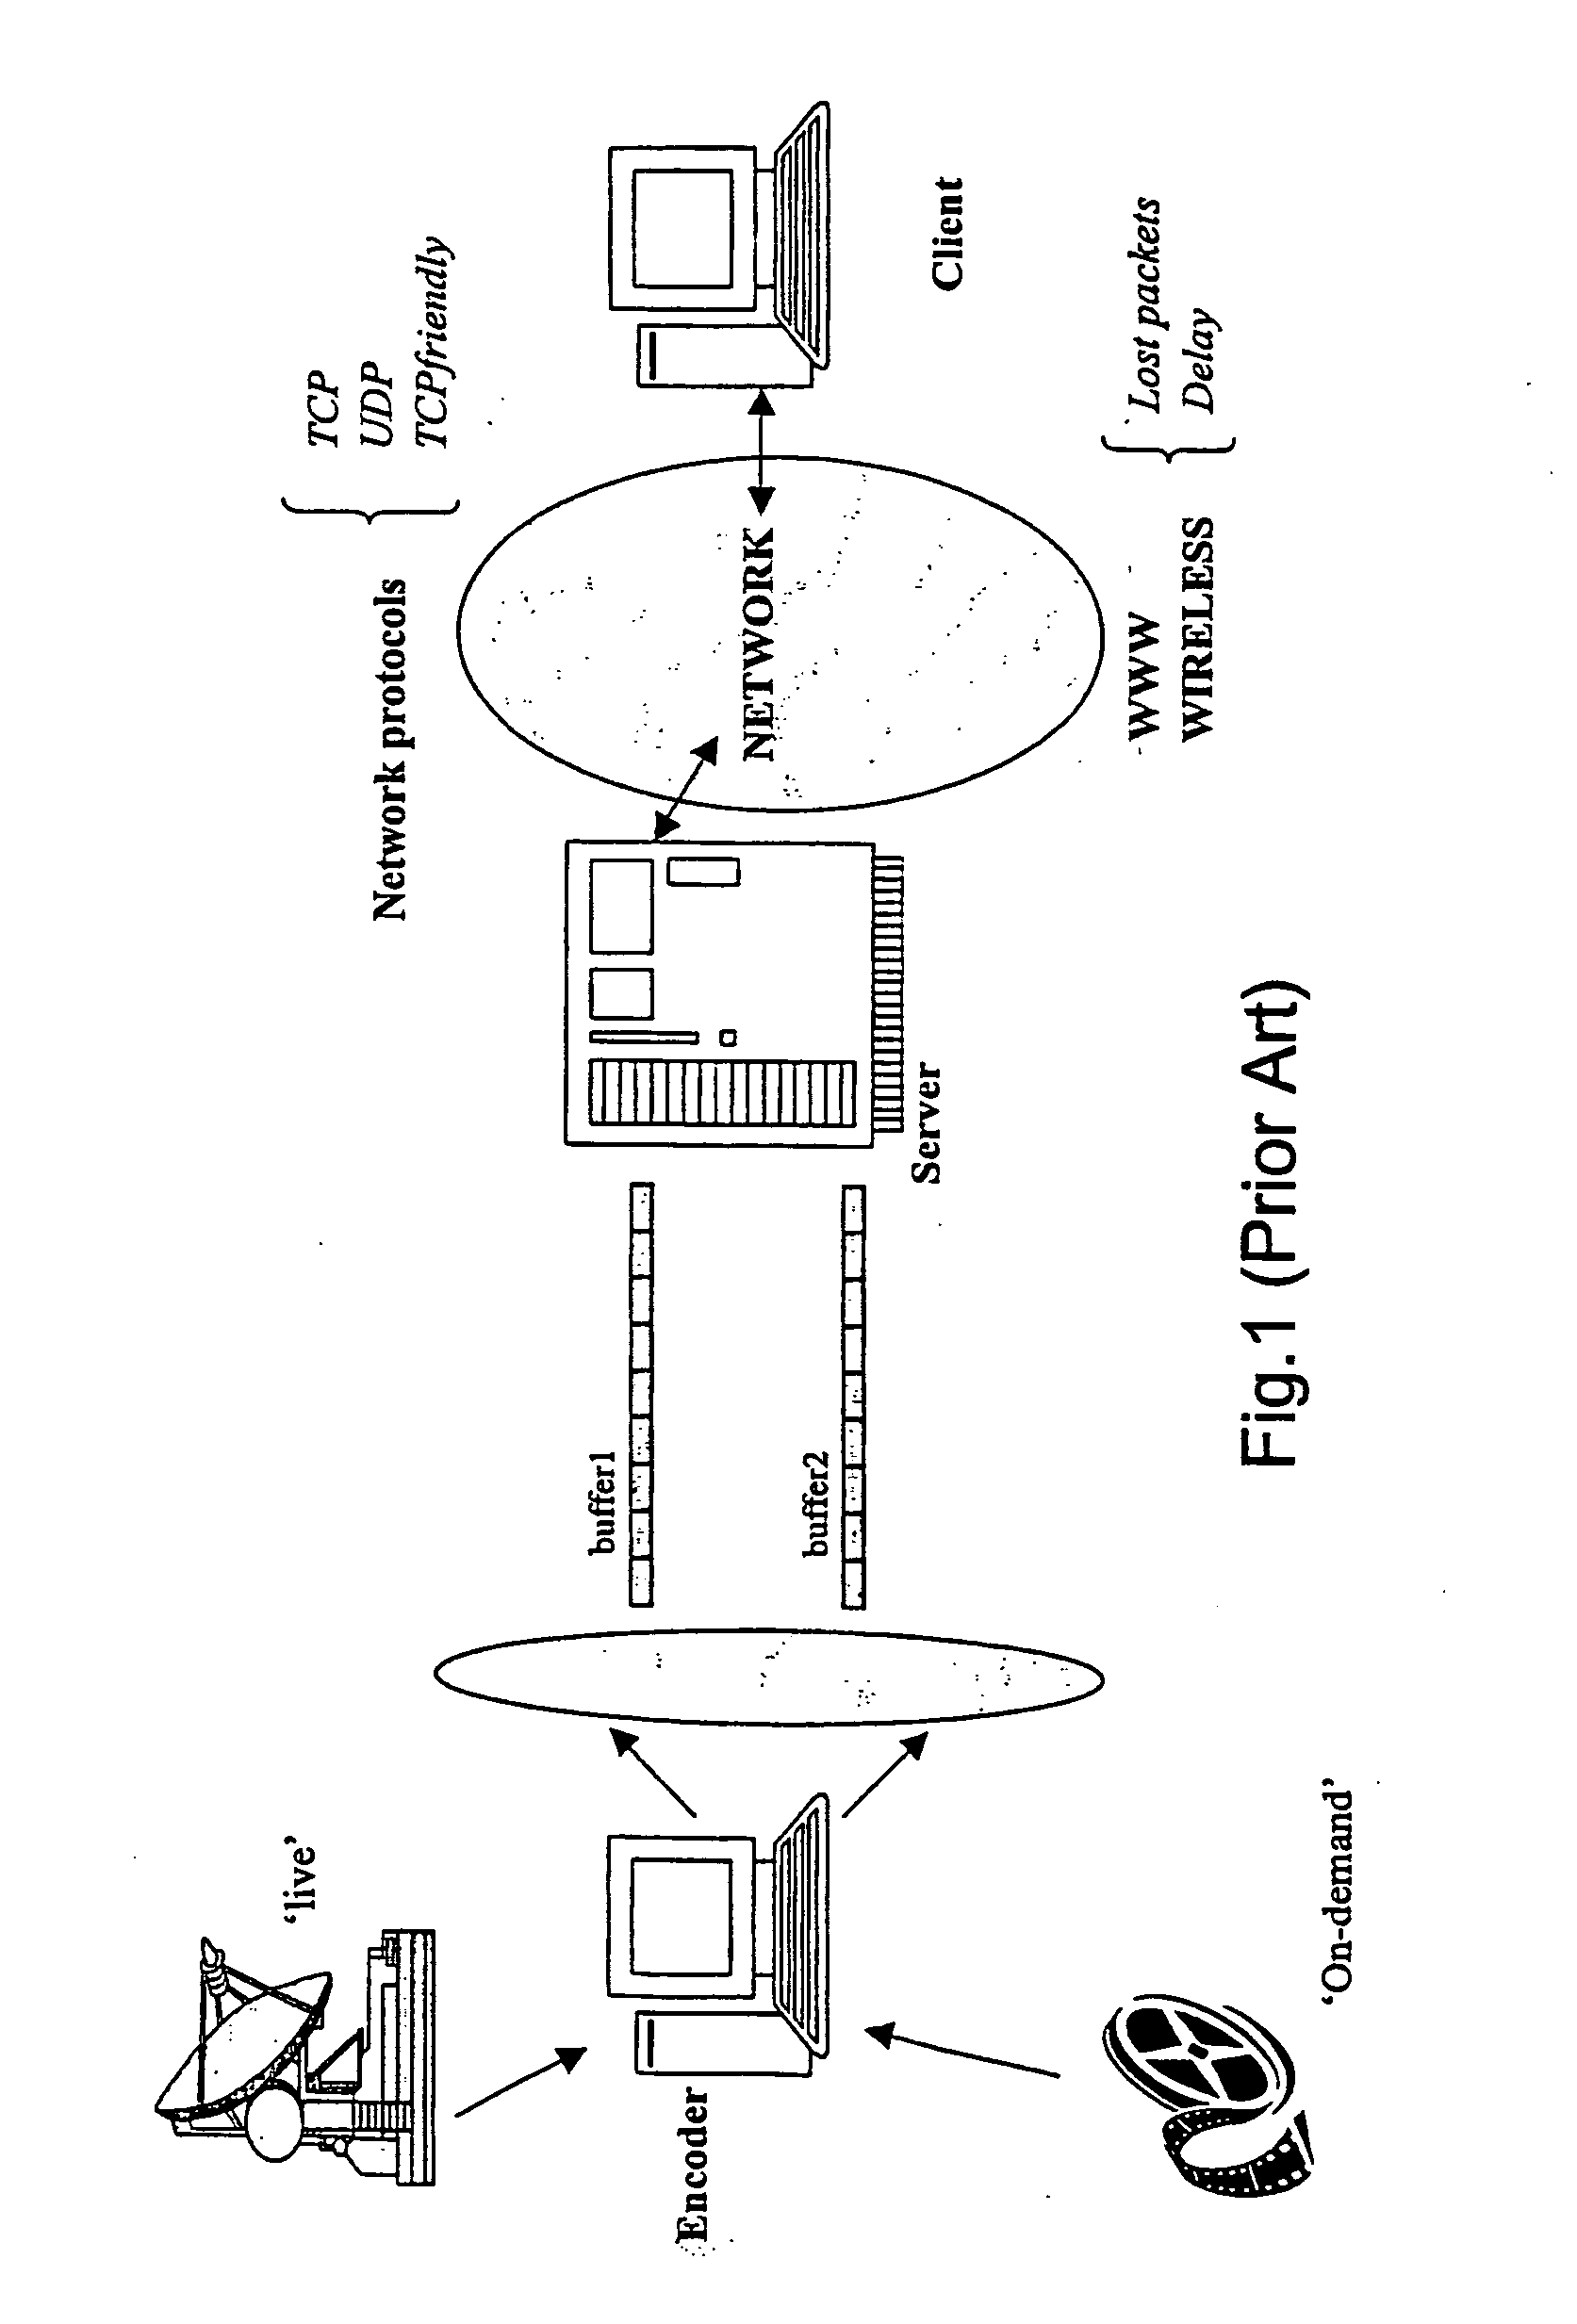 Data communications method and system using buffer size to calculate transmission rate for congestion control